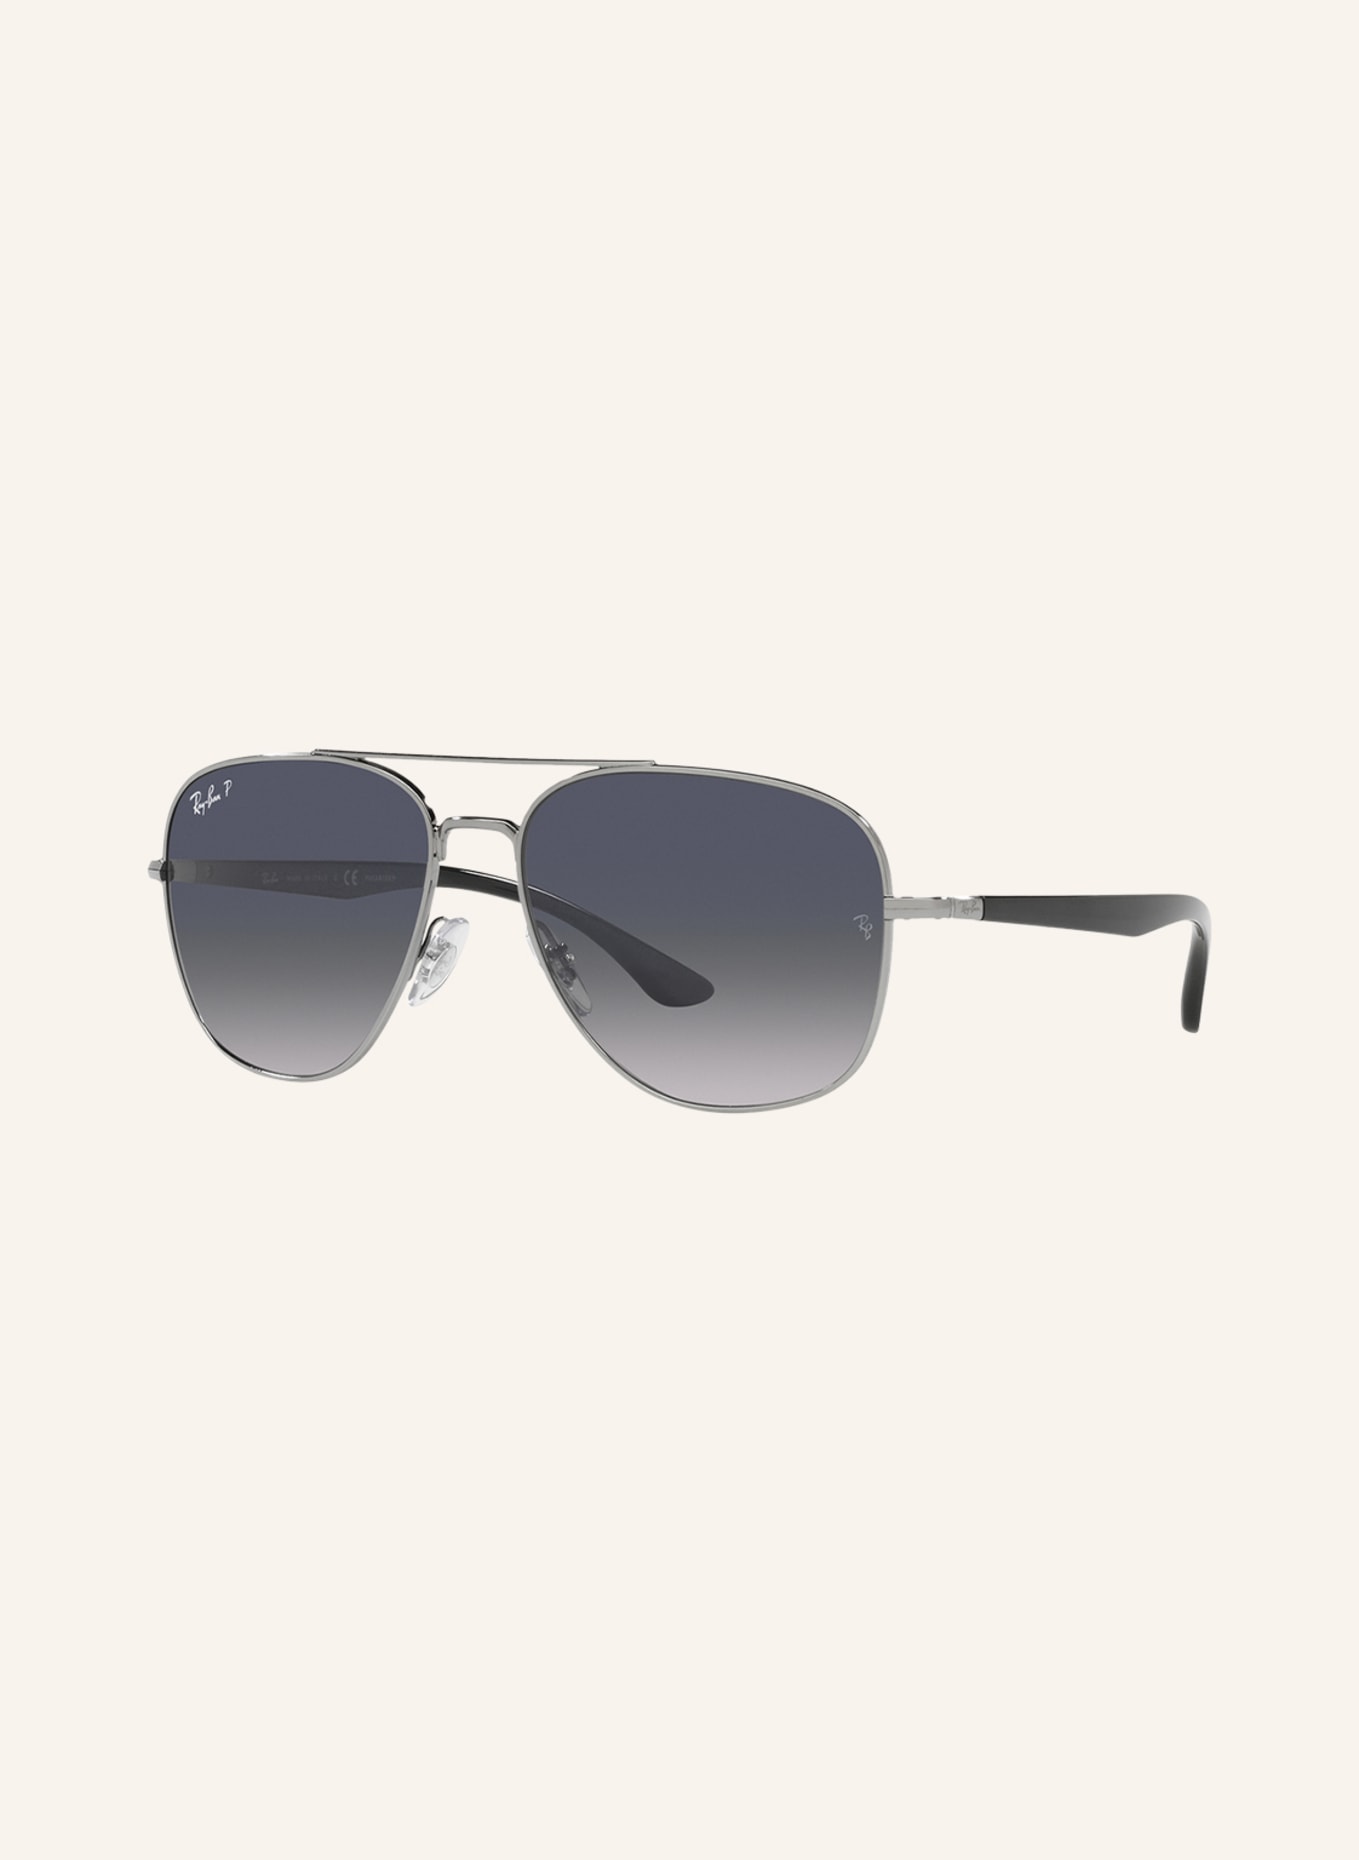 Ray-Ban Sunglasses RB3683, Color: 004/78 - SILVER/GRAY GRADIENT (Image 1)